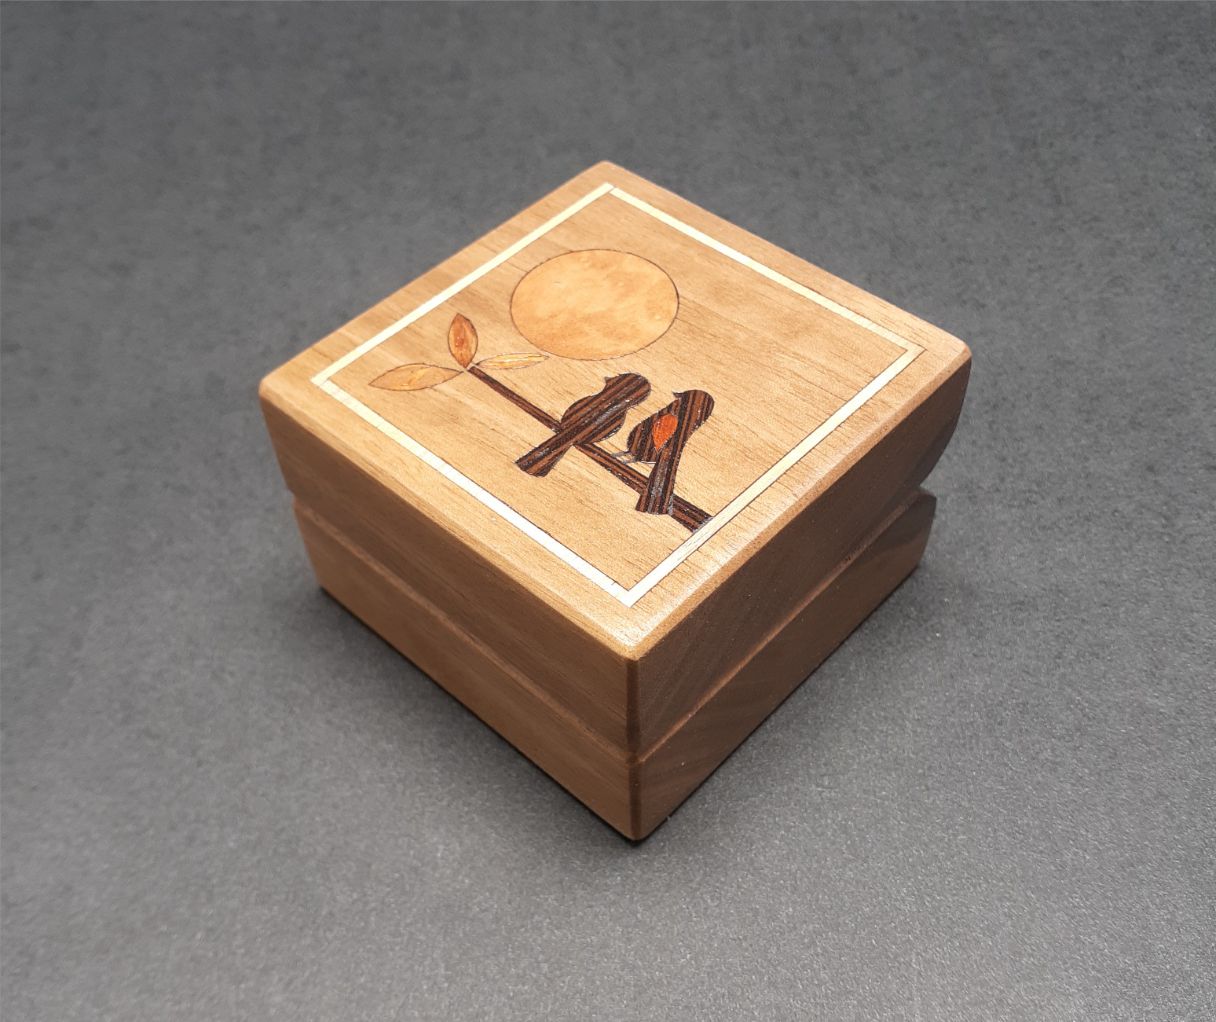 Handcrafted Walnut Ring Box "Two Birds and the Moon" RB-34   Made in the U.S.